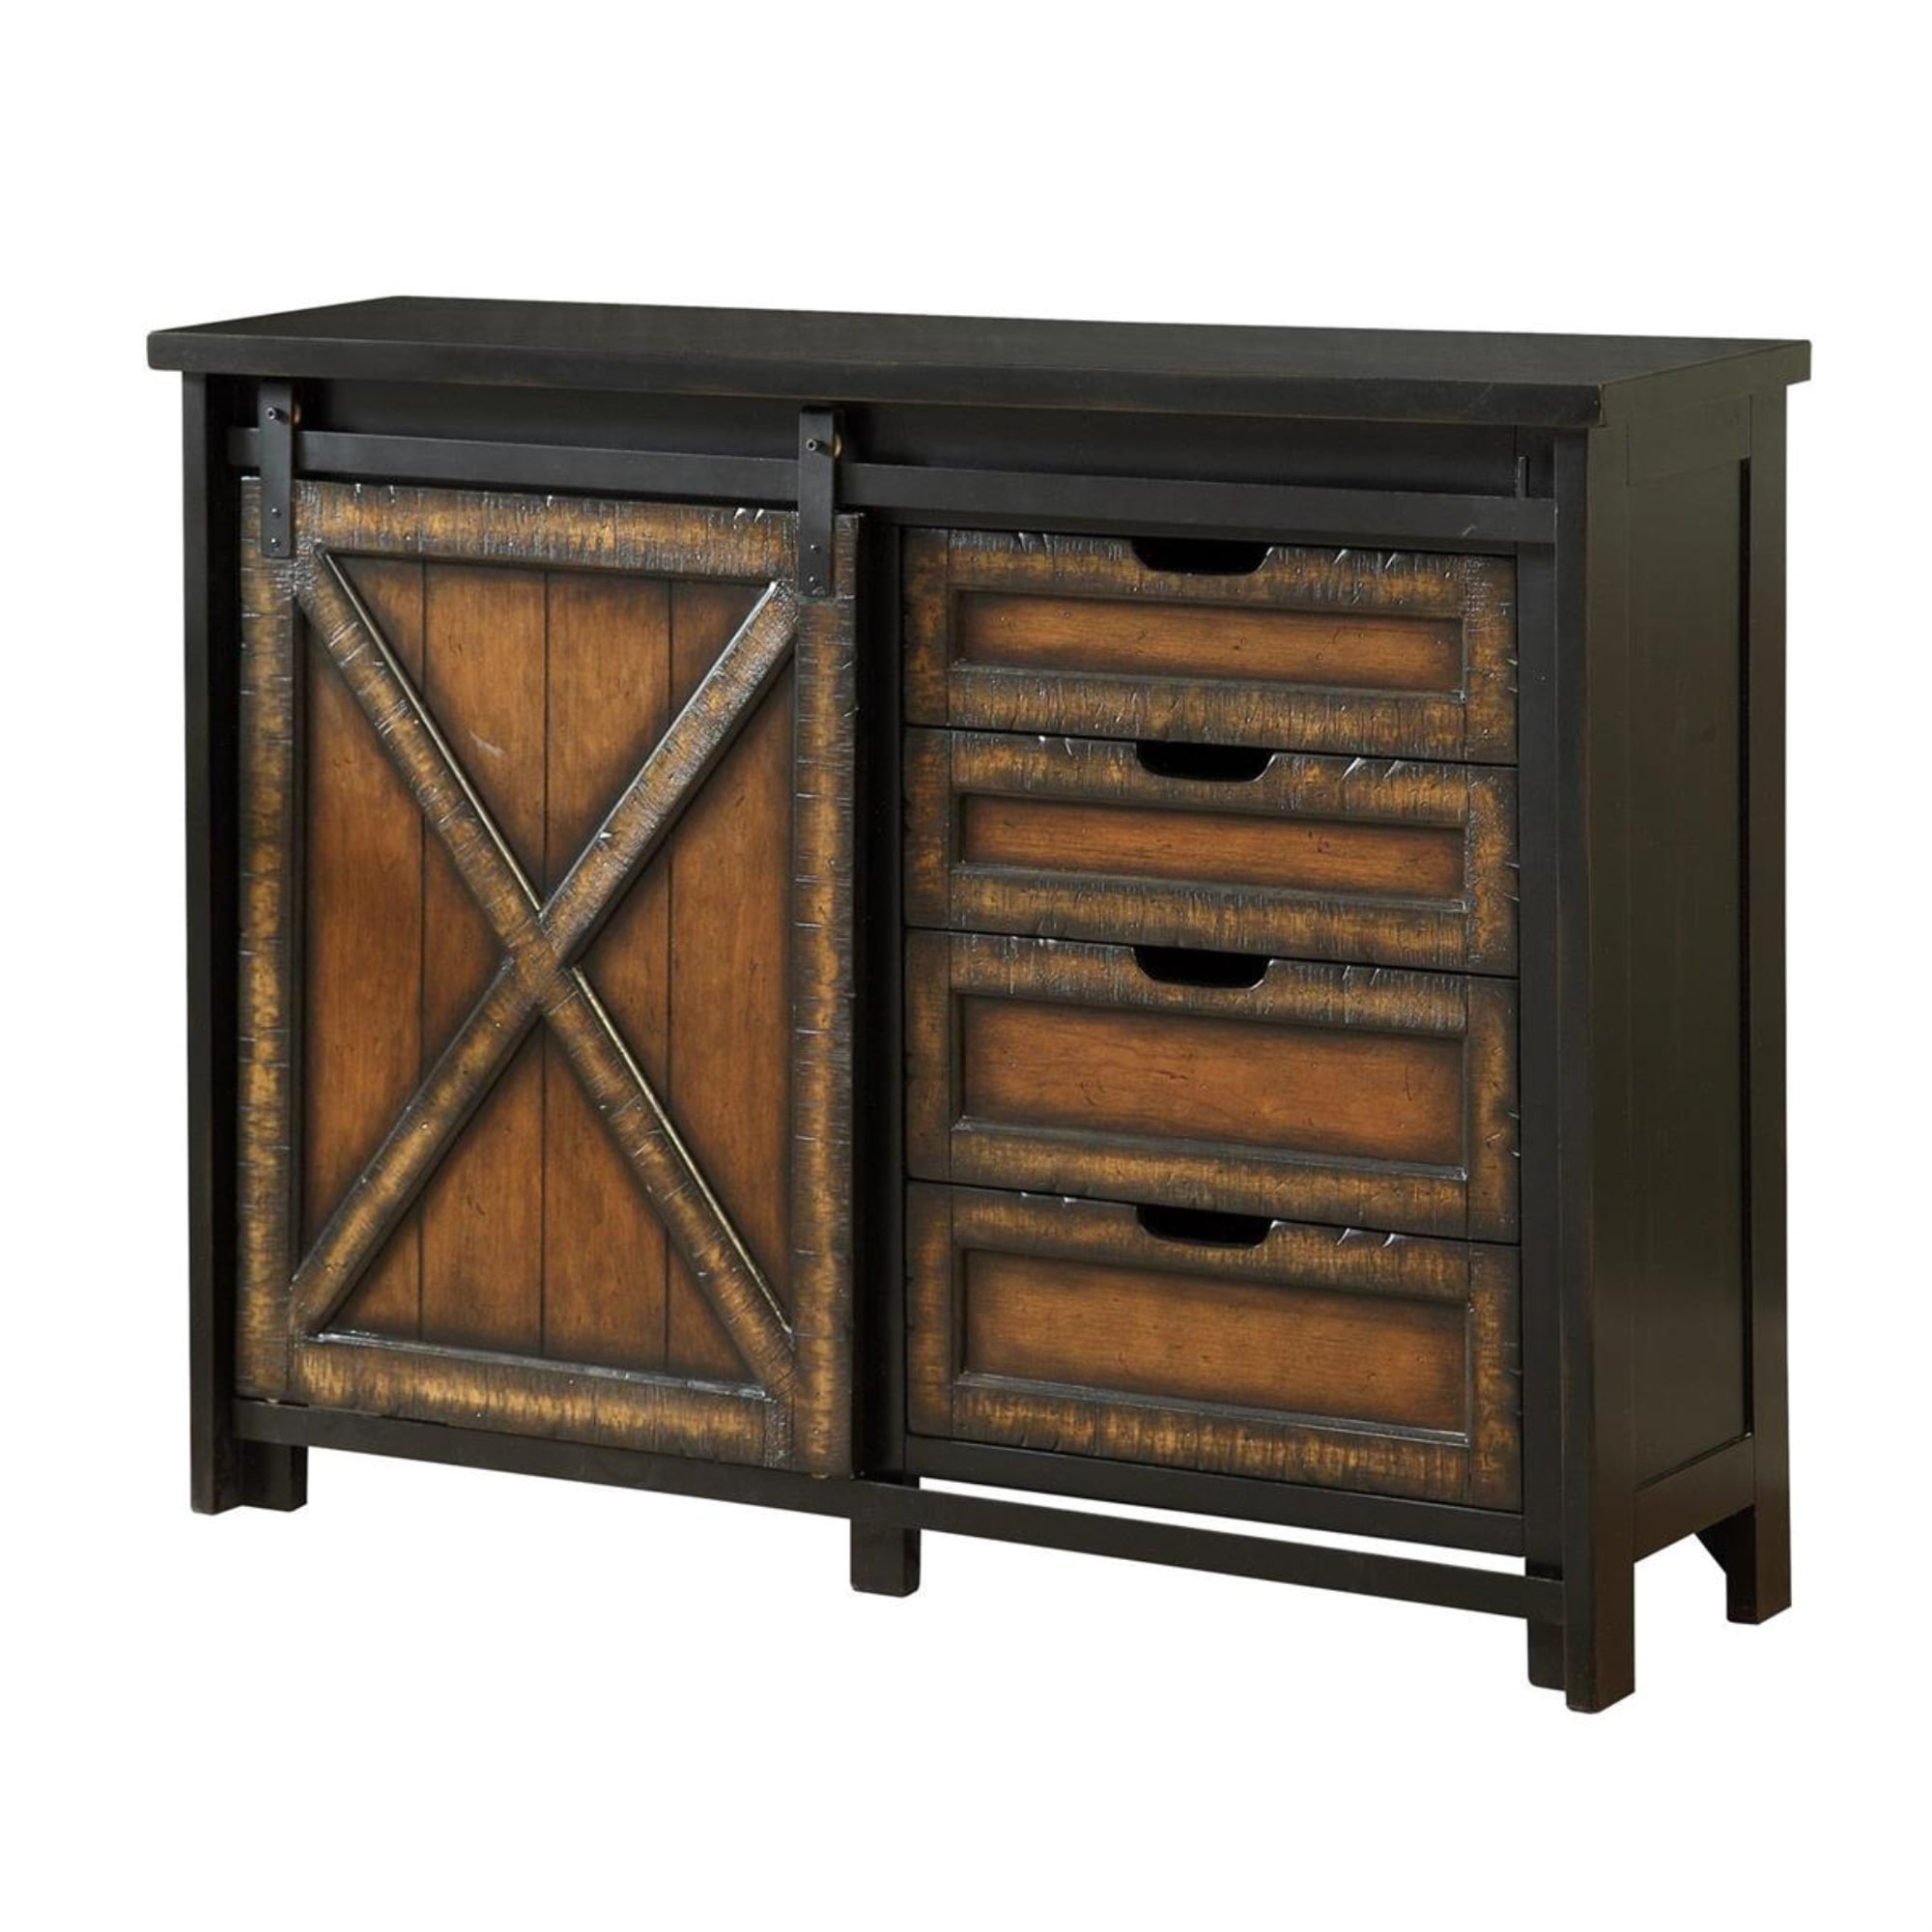 Barn Style 4 Drawer 1 Door by Coast to Coast Imports Babette's Furniture & Home 68220